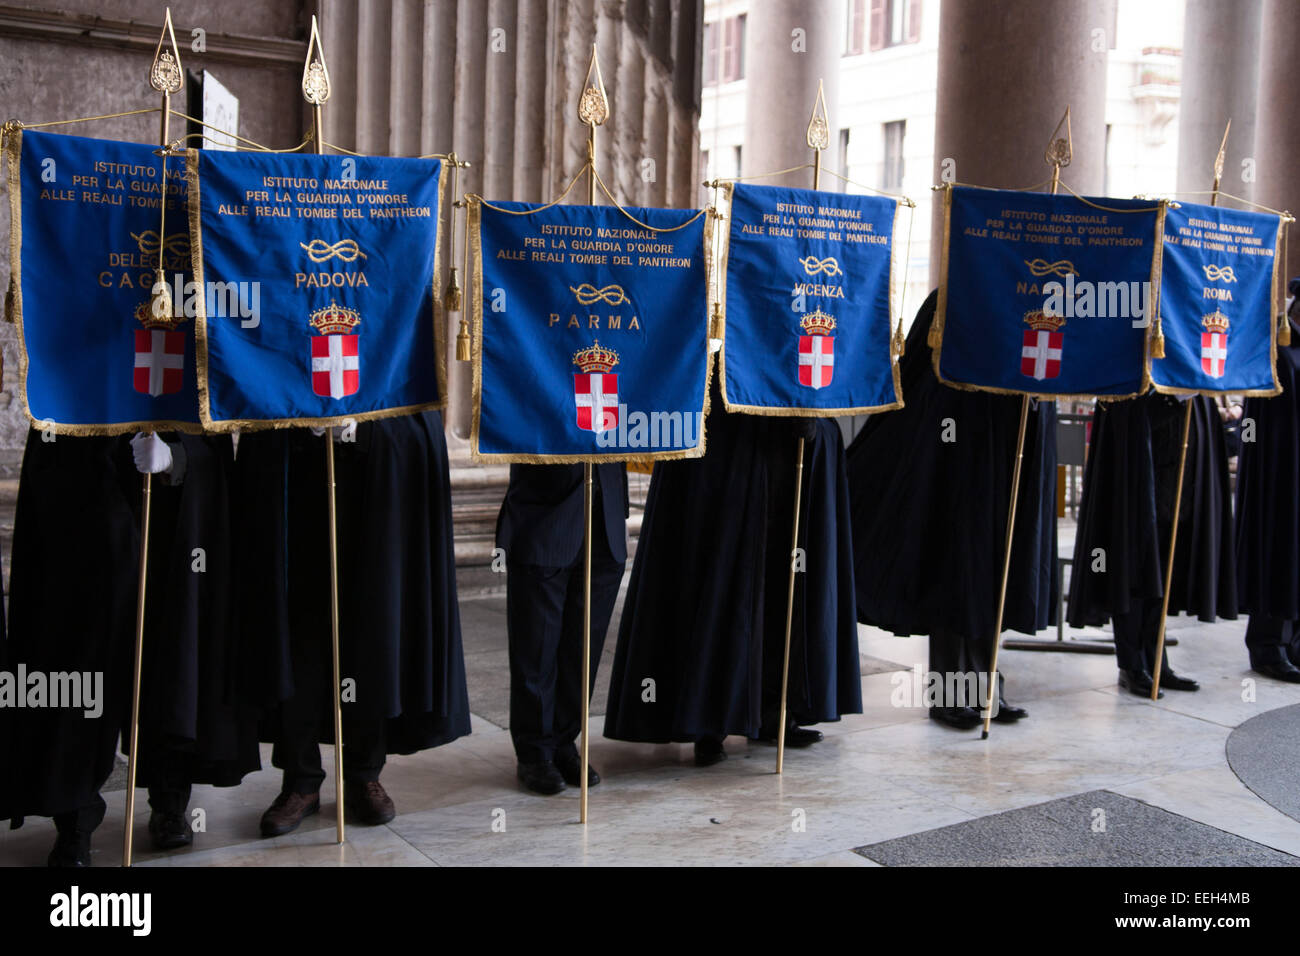 Rome, Italy. 18th Jan, 2015. The celebration of 137th Anniversary of the founding of the Honor Guard of the Royal Tombs of the Pantheon, where wreath were laid to the Unknown Soldier and the Altar of the Fatherland and a Mass inside the Pantheon, paying homage to the tombs of the kings of Italy. Credit:  Luca Prizia/Pacific Press/Alamy Live News Stock Photo